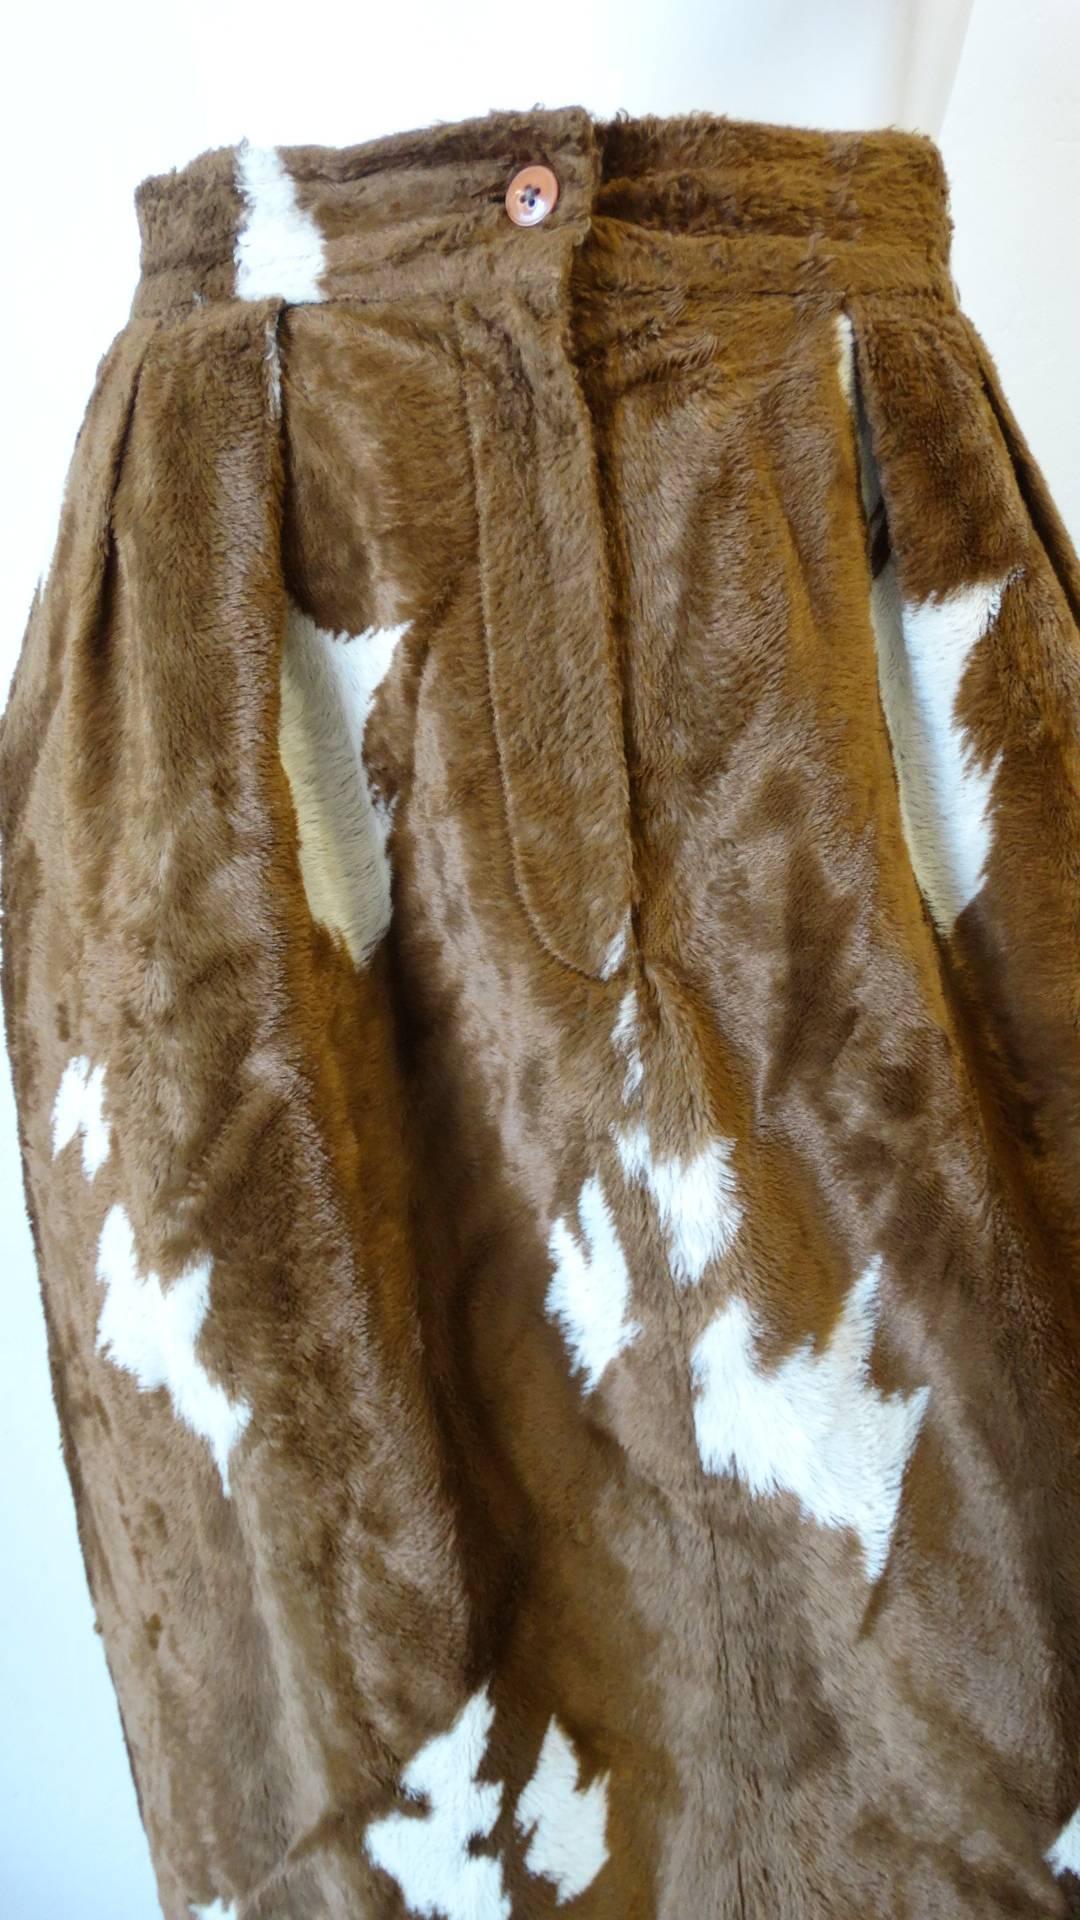 Cowgirl up with our amazing 1990s faux cowhide fuzzy pencil skirt! Made of a soft fuzzy faux fur fabric, printed with brown and white cow spots. Pencil skirt silhouette with high waisted fit and puckered waistline. Zips and buttons up the front.